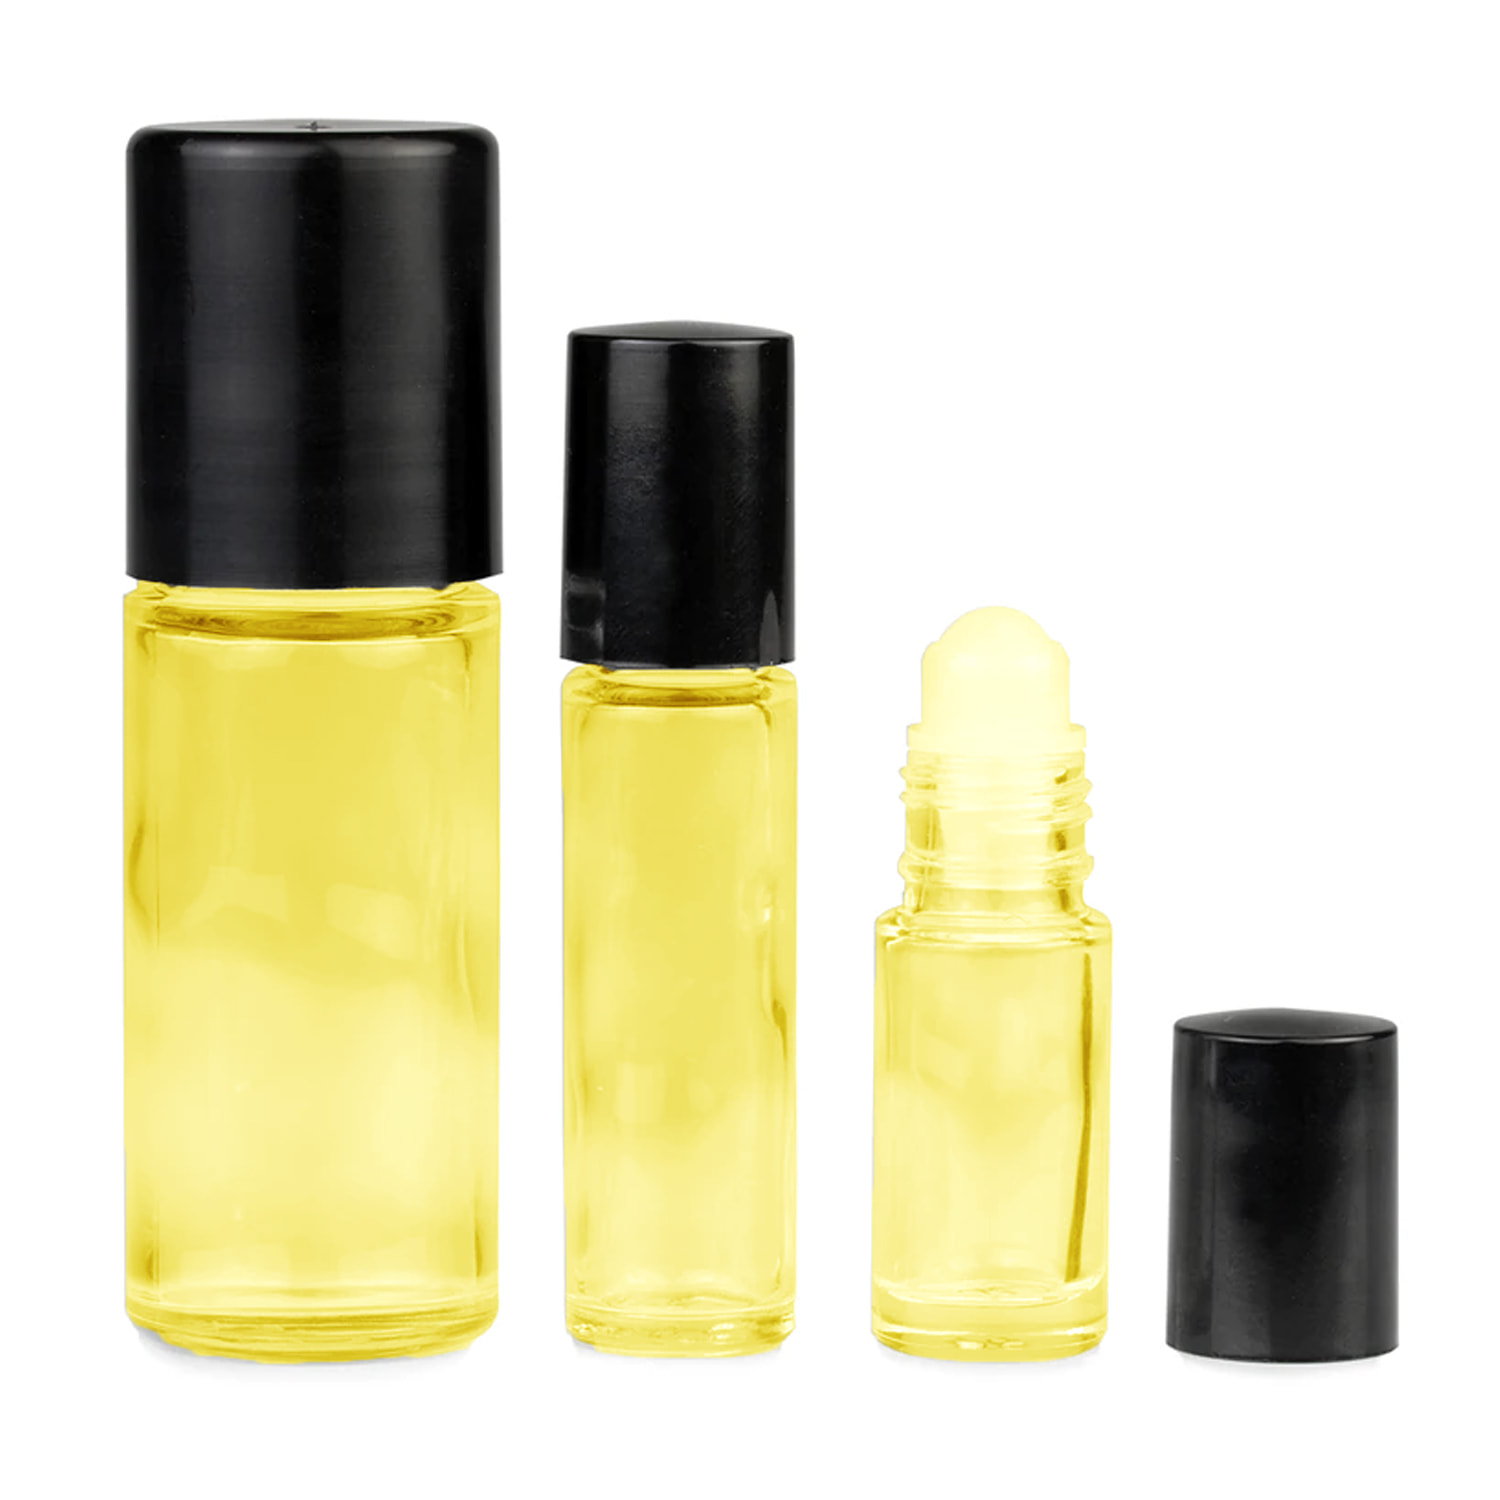 L'immensite Type Body Oil-Luxury Oil-Men's Scents-Amber Spicy alcohol-free  perfume -*Not a Name Brand Product